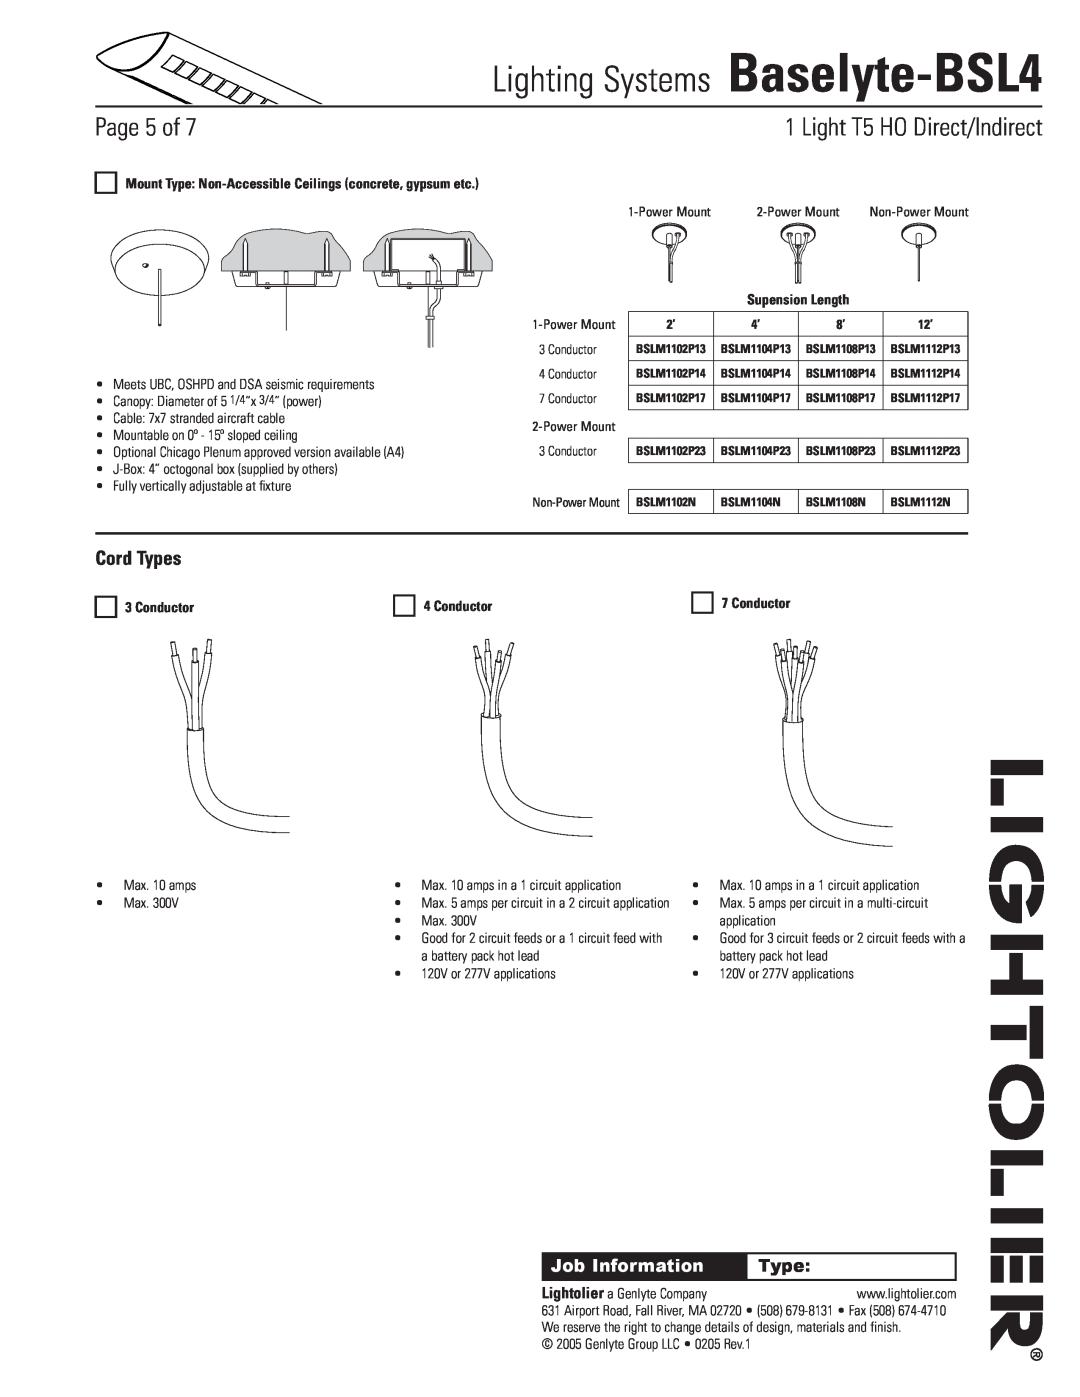 Lightolier specifications Cord Types, Conductor, Lighting Systems Baselyte-BSL4, Page of, Light T5 HO Direct/Indirect 